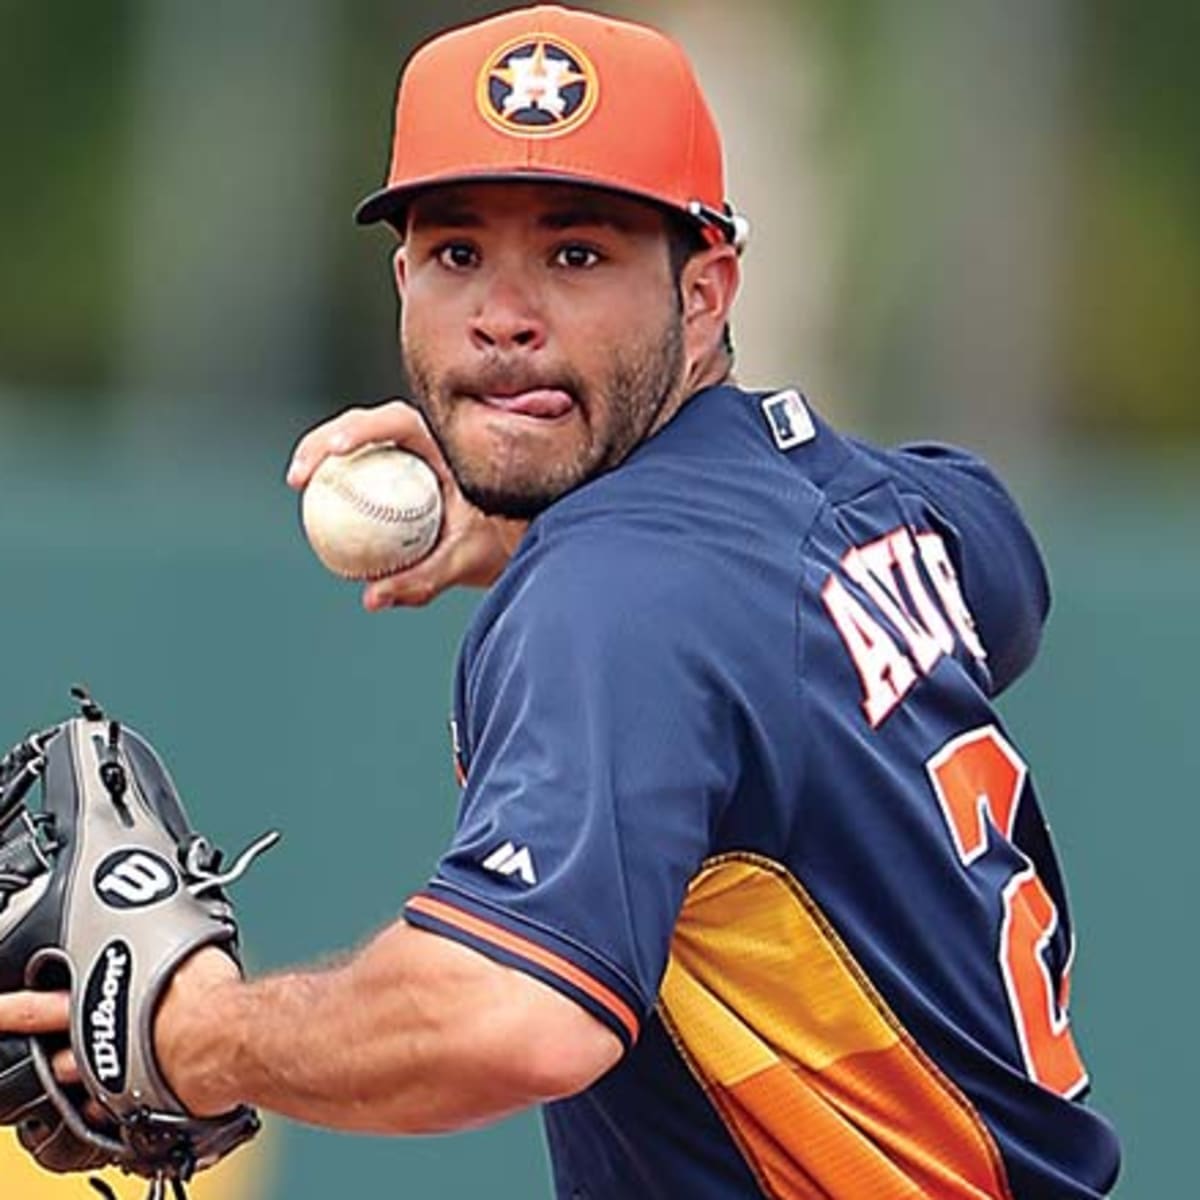 Vote now to put Altuve in the 2015 All-Star Game